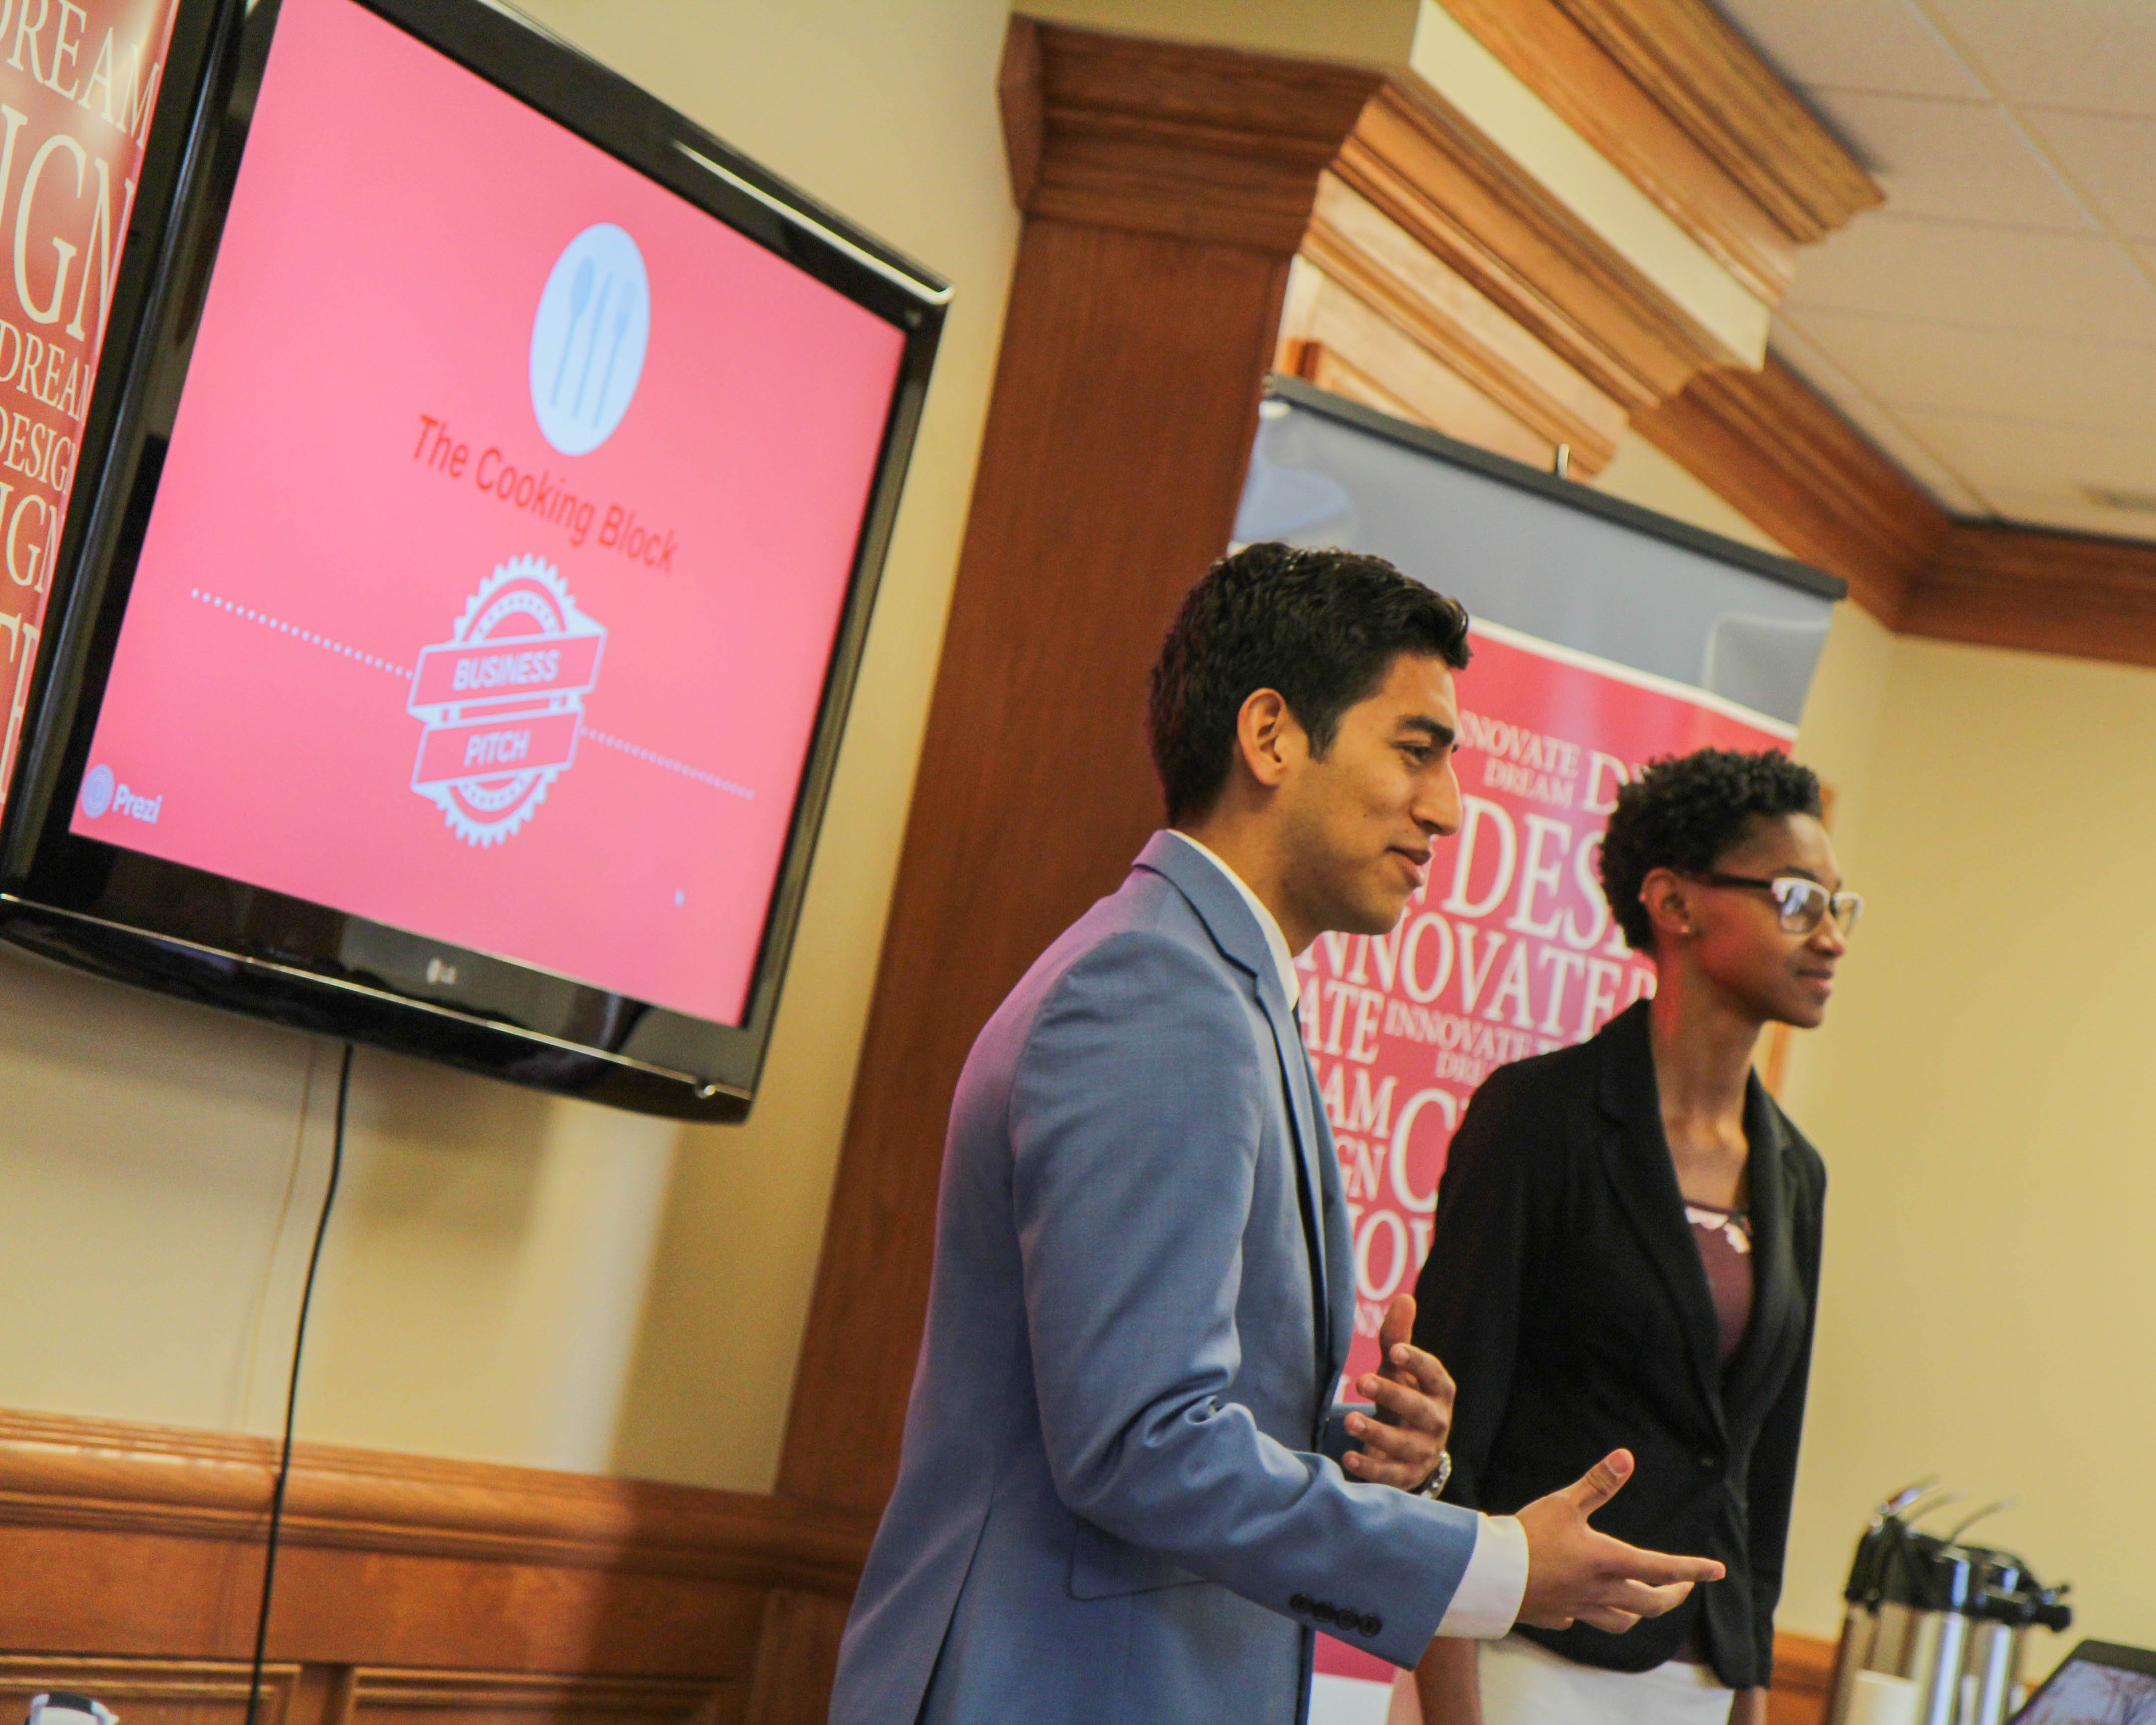 Brianna Manigault-King '20 and Frankchesco Leveratto '19 present their idea, Cooking Block, to the panel of judges.